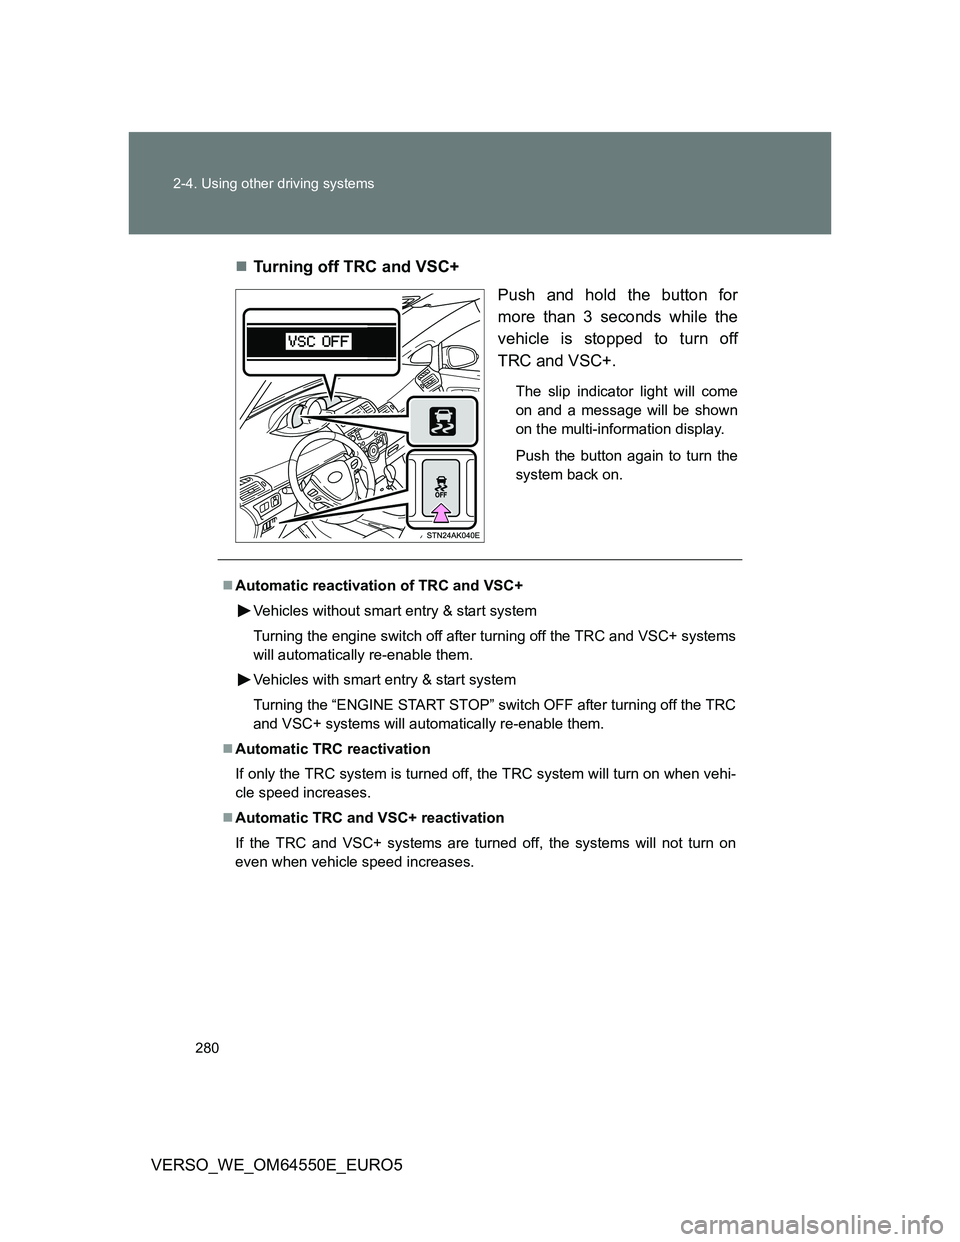 TOYOTA VERSO 2013  Owners Manual 280 2-4. Using other driving systems
VERSO_WE_OM64550E_EURO5Turning off TRC and VSC+
Push and hold the button for
more than 3 seconds while the
vehicle is stopped to turn off
TRC and VSC+.
The slip